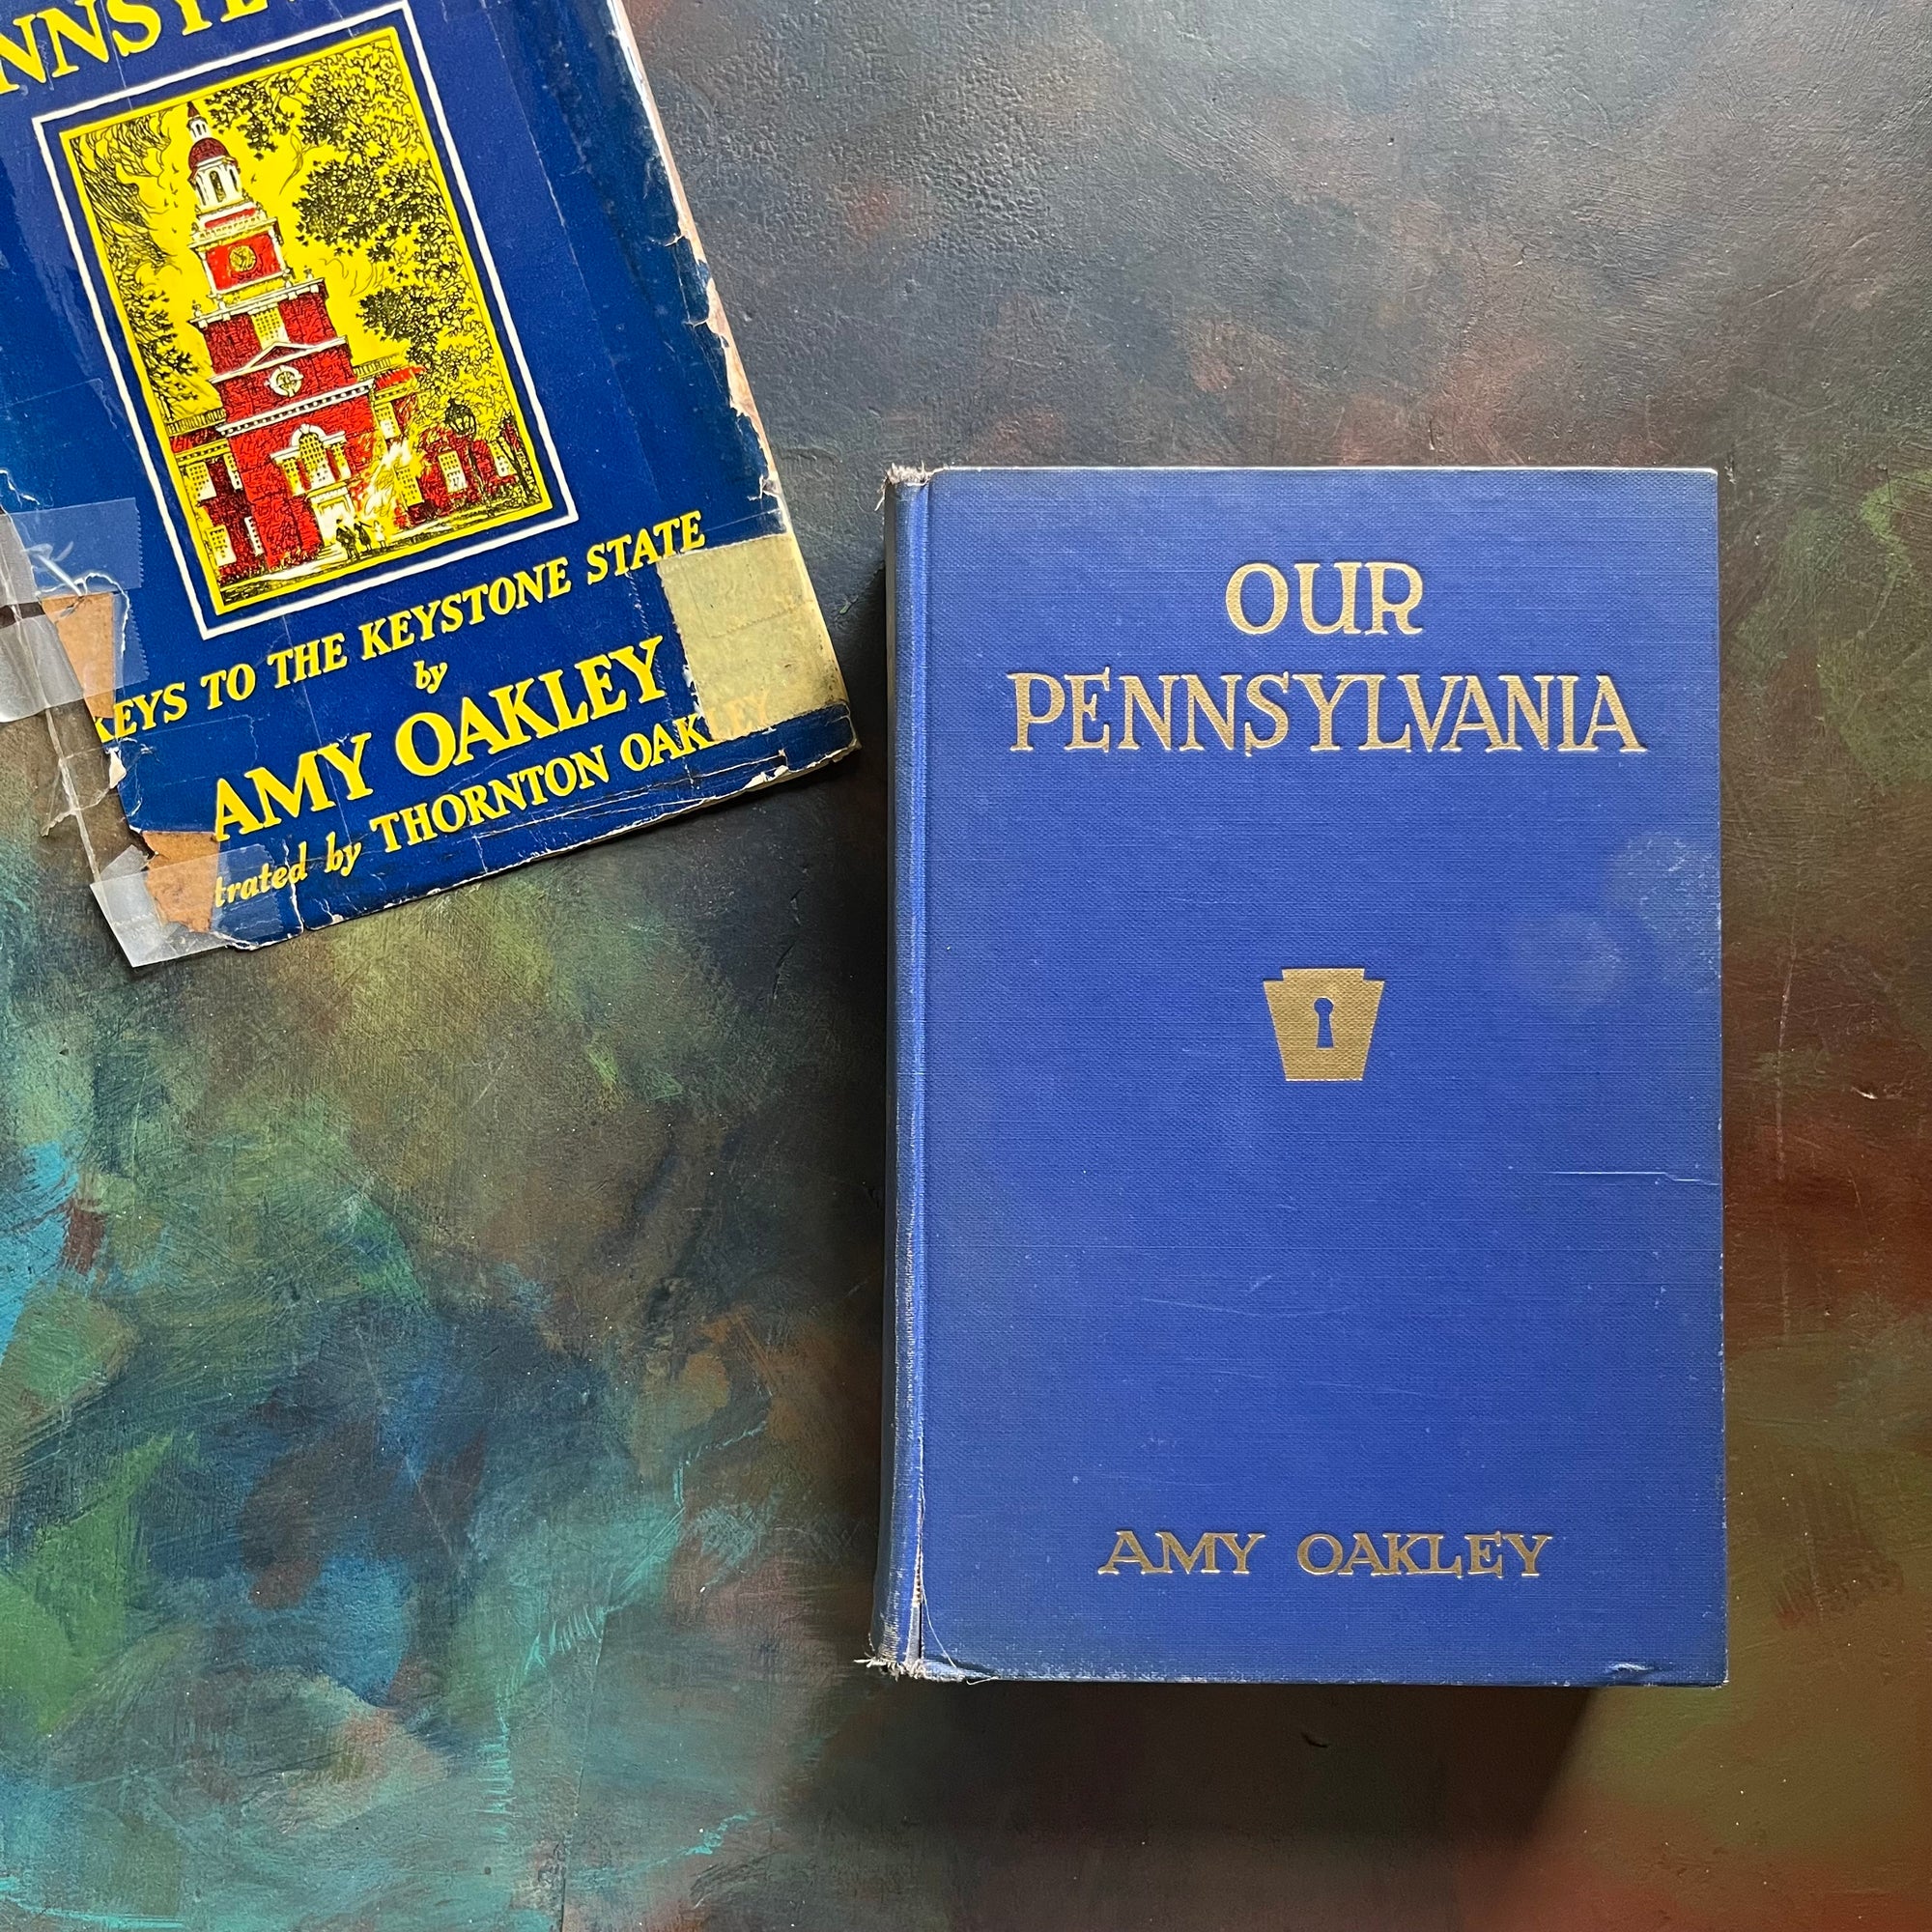 Our Pennsylvania-Keys to the Keystone State by Amy Oakley-vintage Pennsylvania History Book-view of the front cover